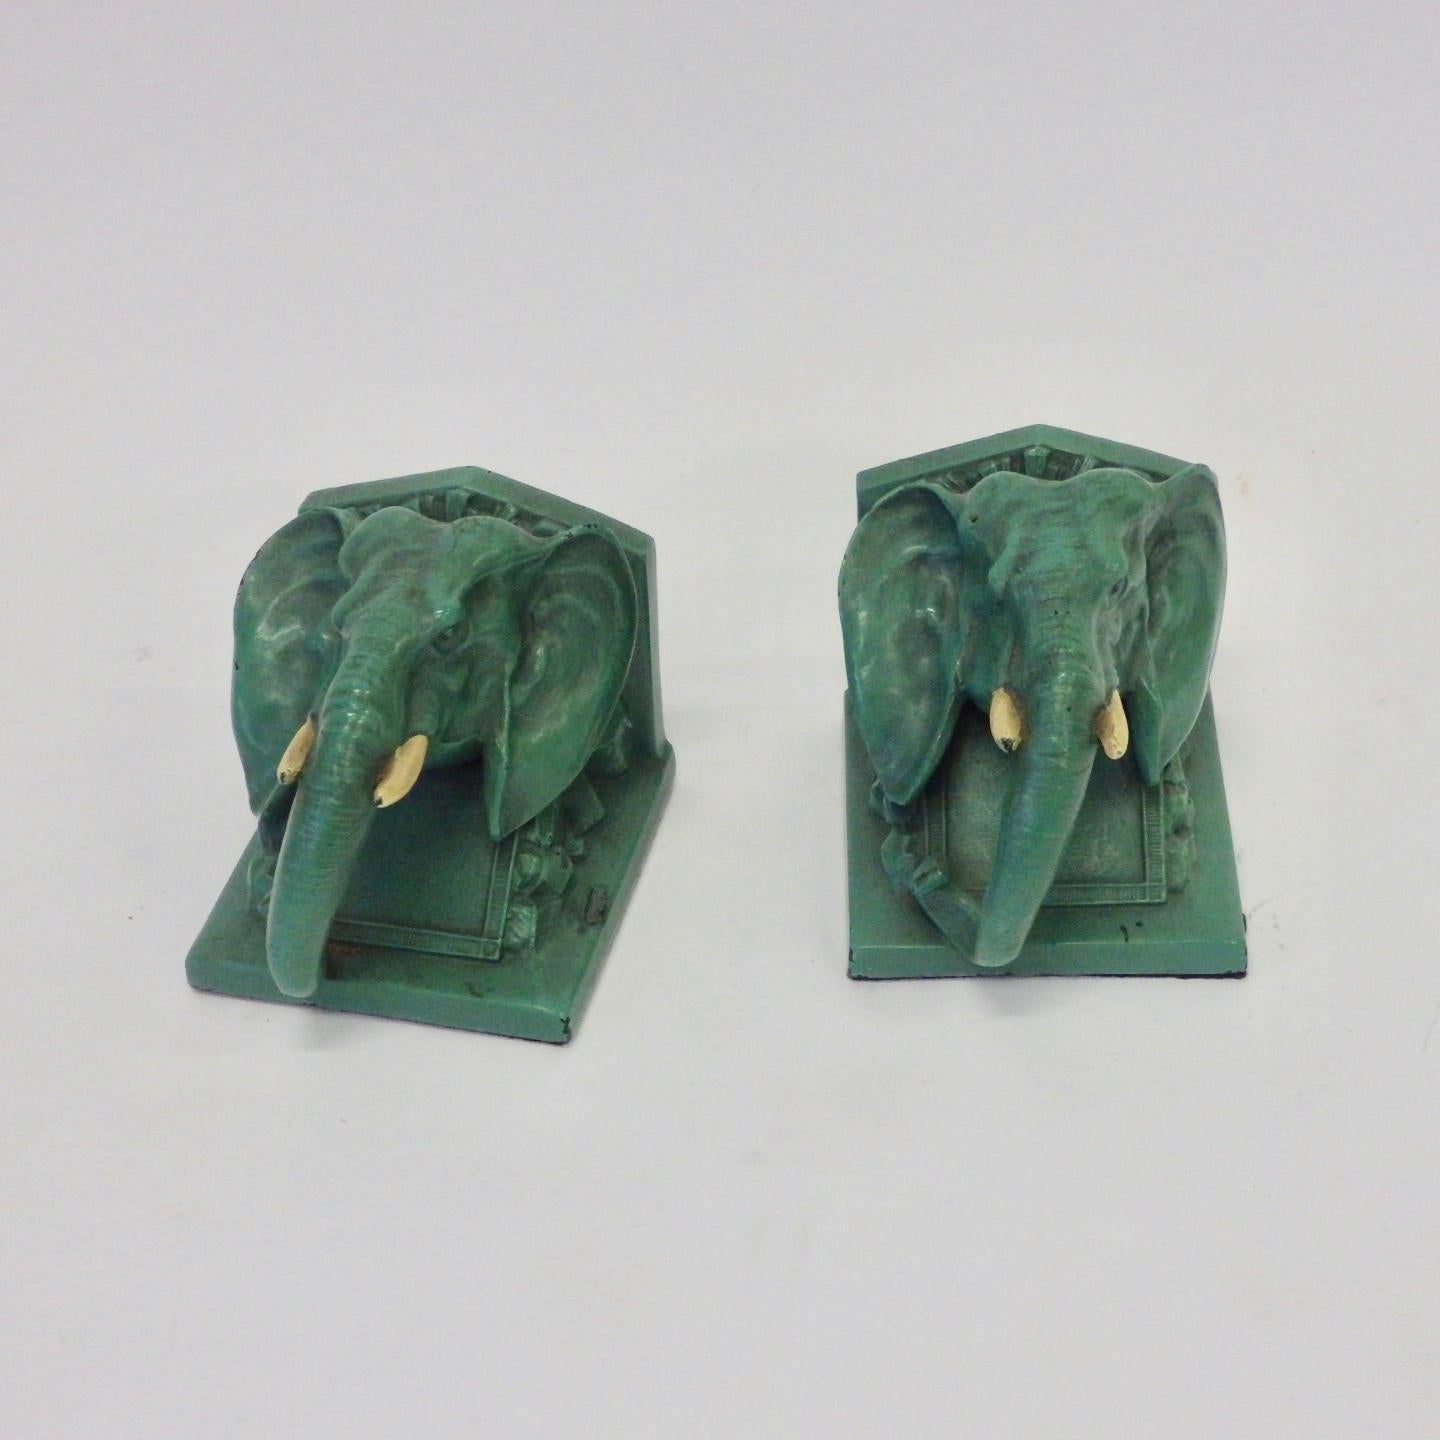 Pair of 1940s cast elephant bookends in original green paint.